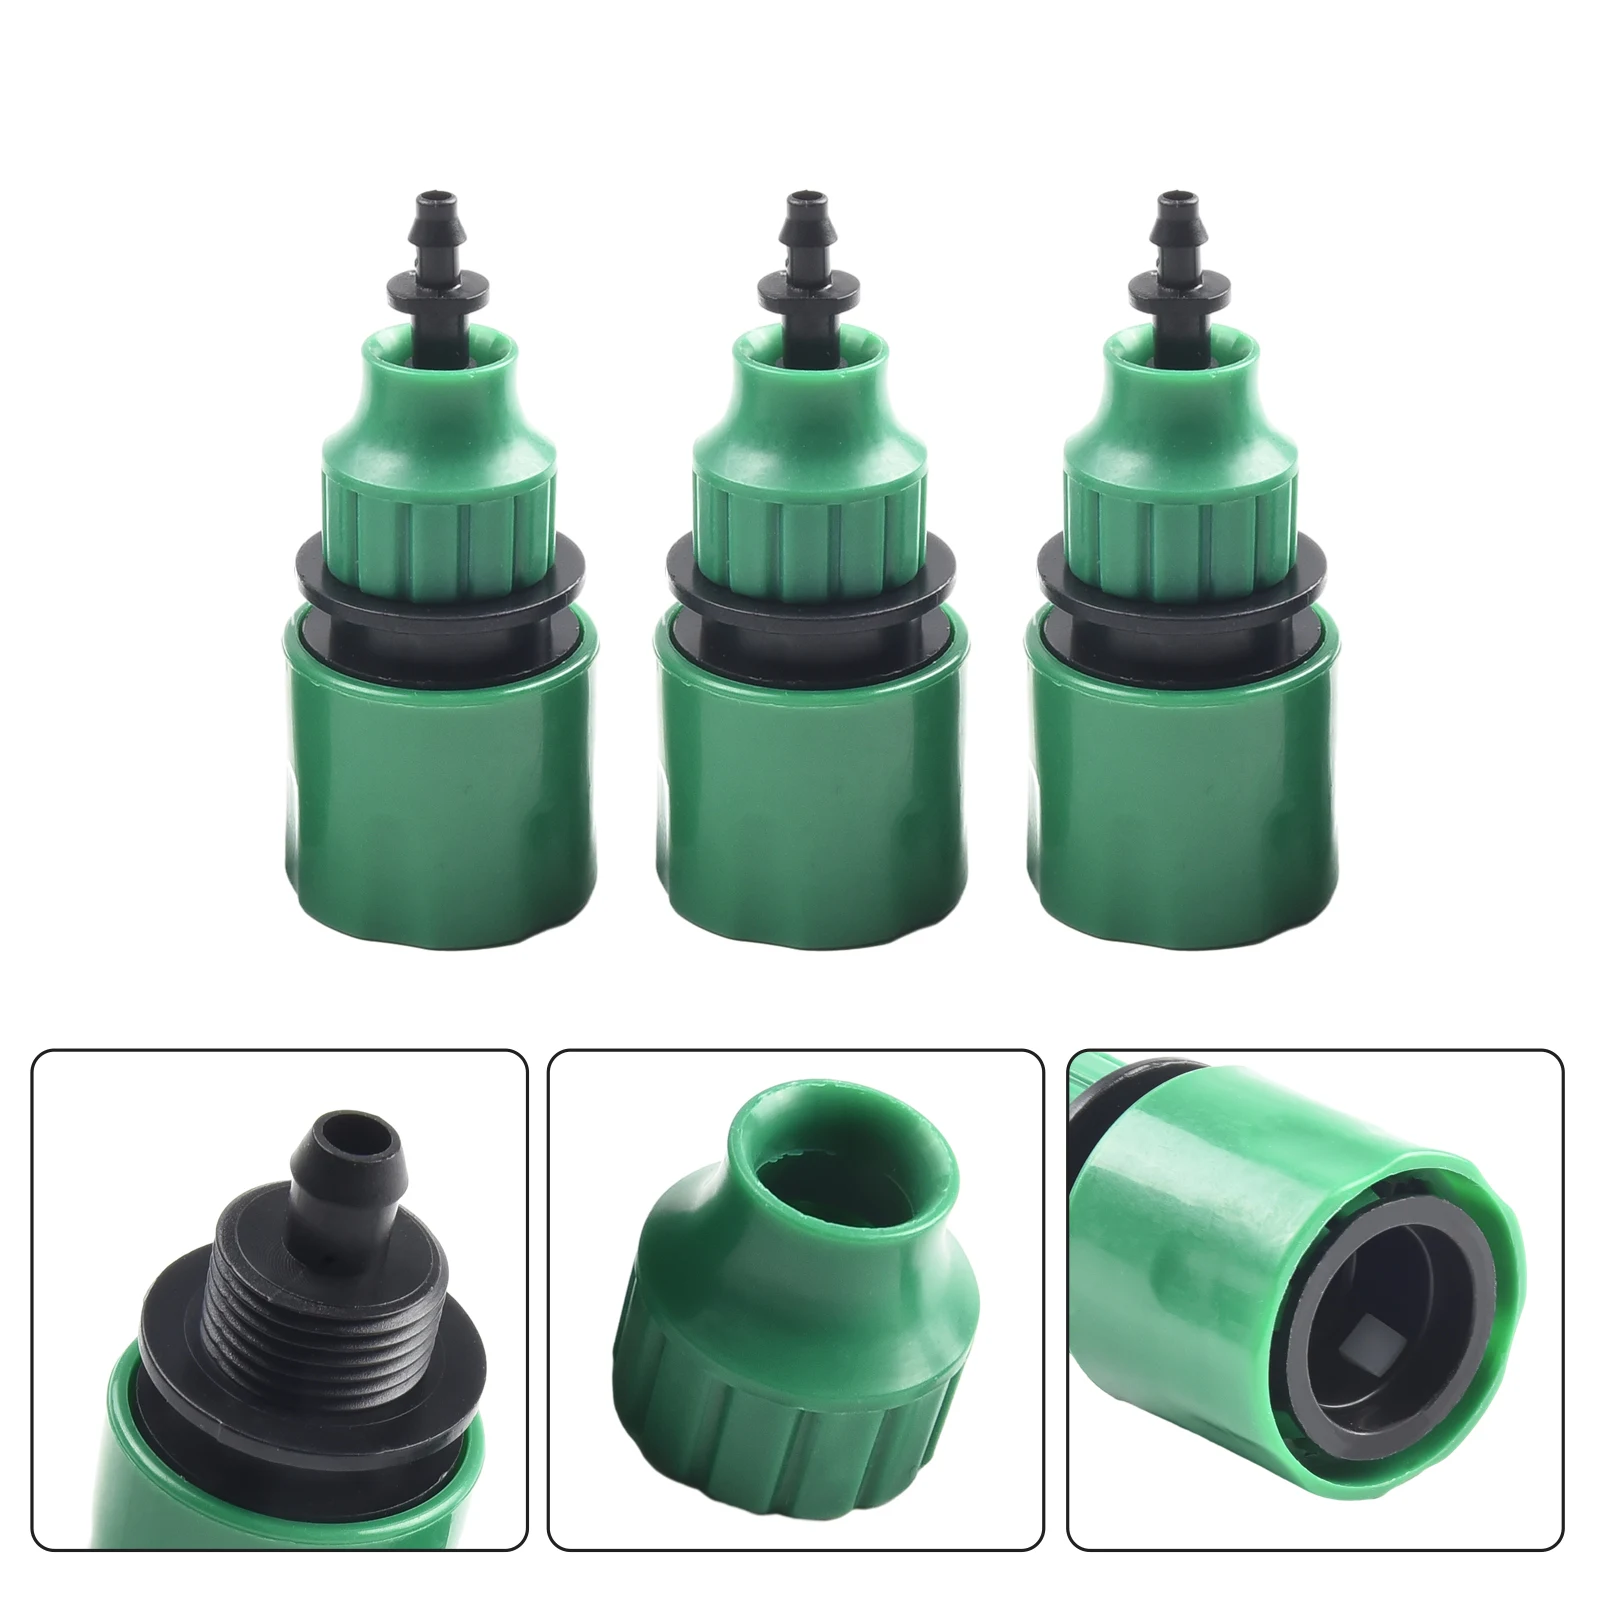 

5 X Water Hose Quick Connector 4/7mm, 8/11mm Plastic Garden Water Hose Quick Connector Micro Irrigation Adapter Connector